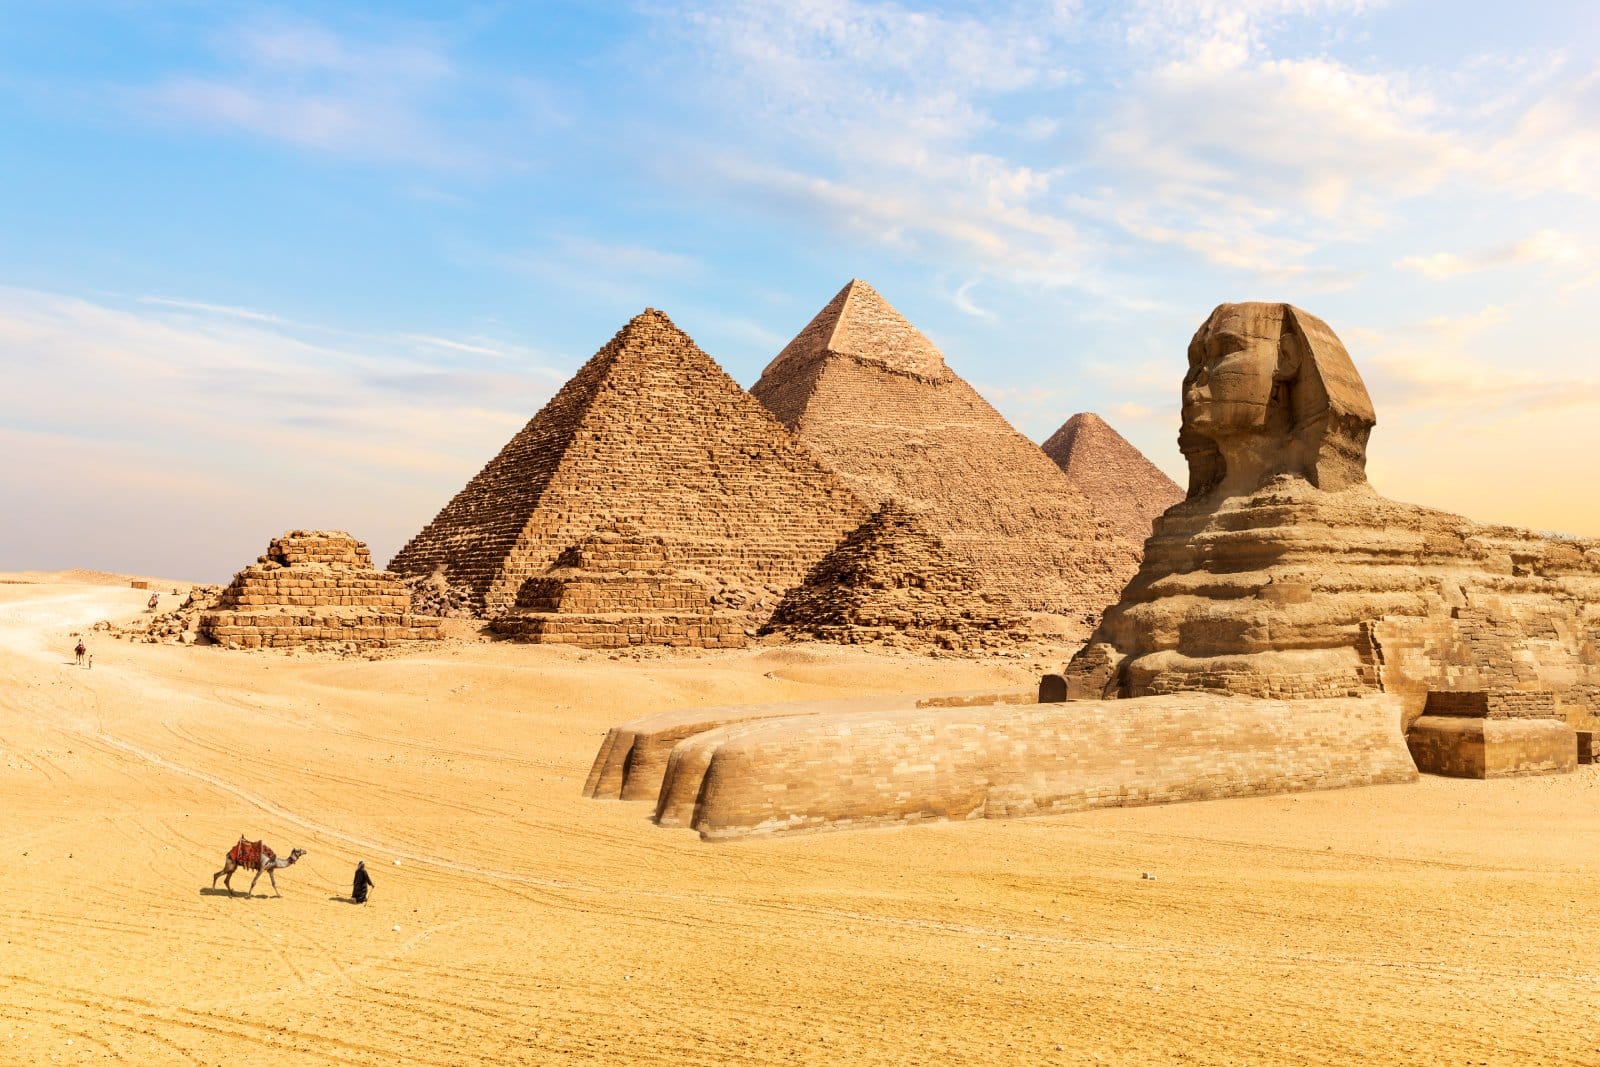 <p class="wp-caption-text">Image Credit: Shutterstock / AlexAnton</p>  <p>In historic sites like the pyramids of Giza, locals lament the lack of sensitivity among American visitors who seem more focused on selfies than understanding the ancient history.</p>